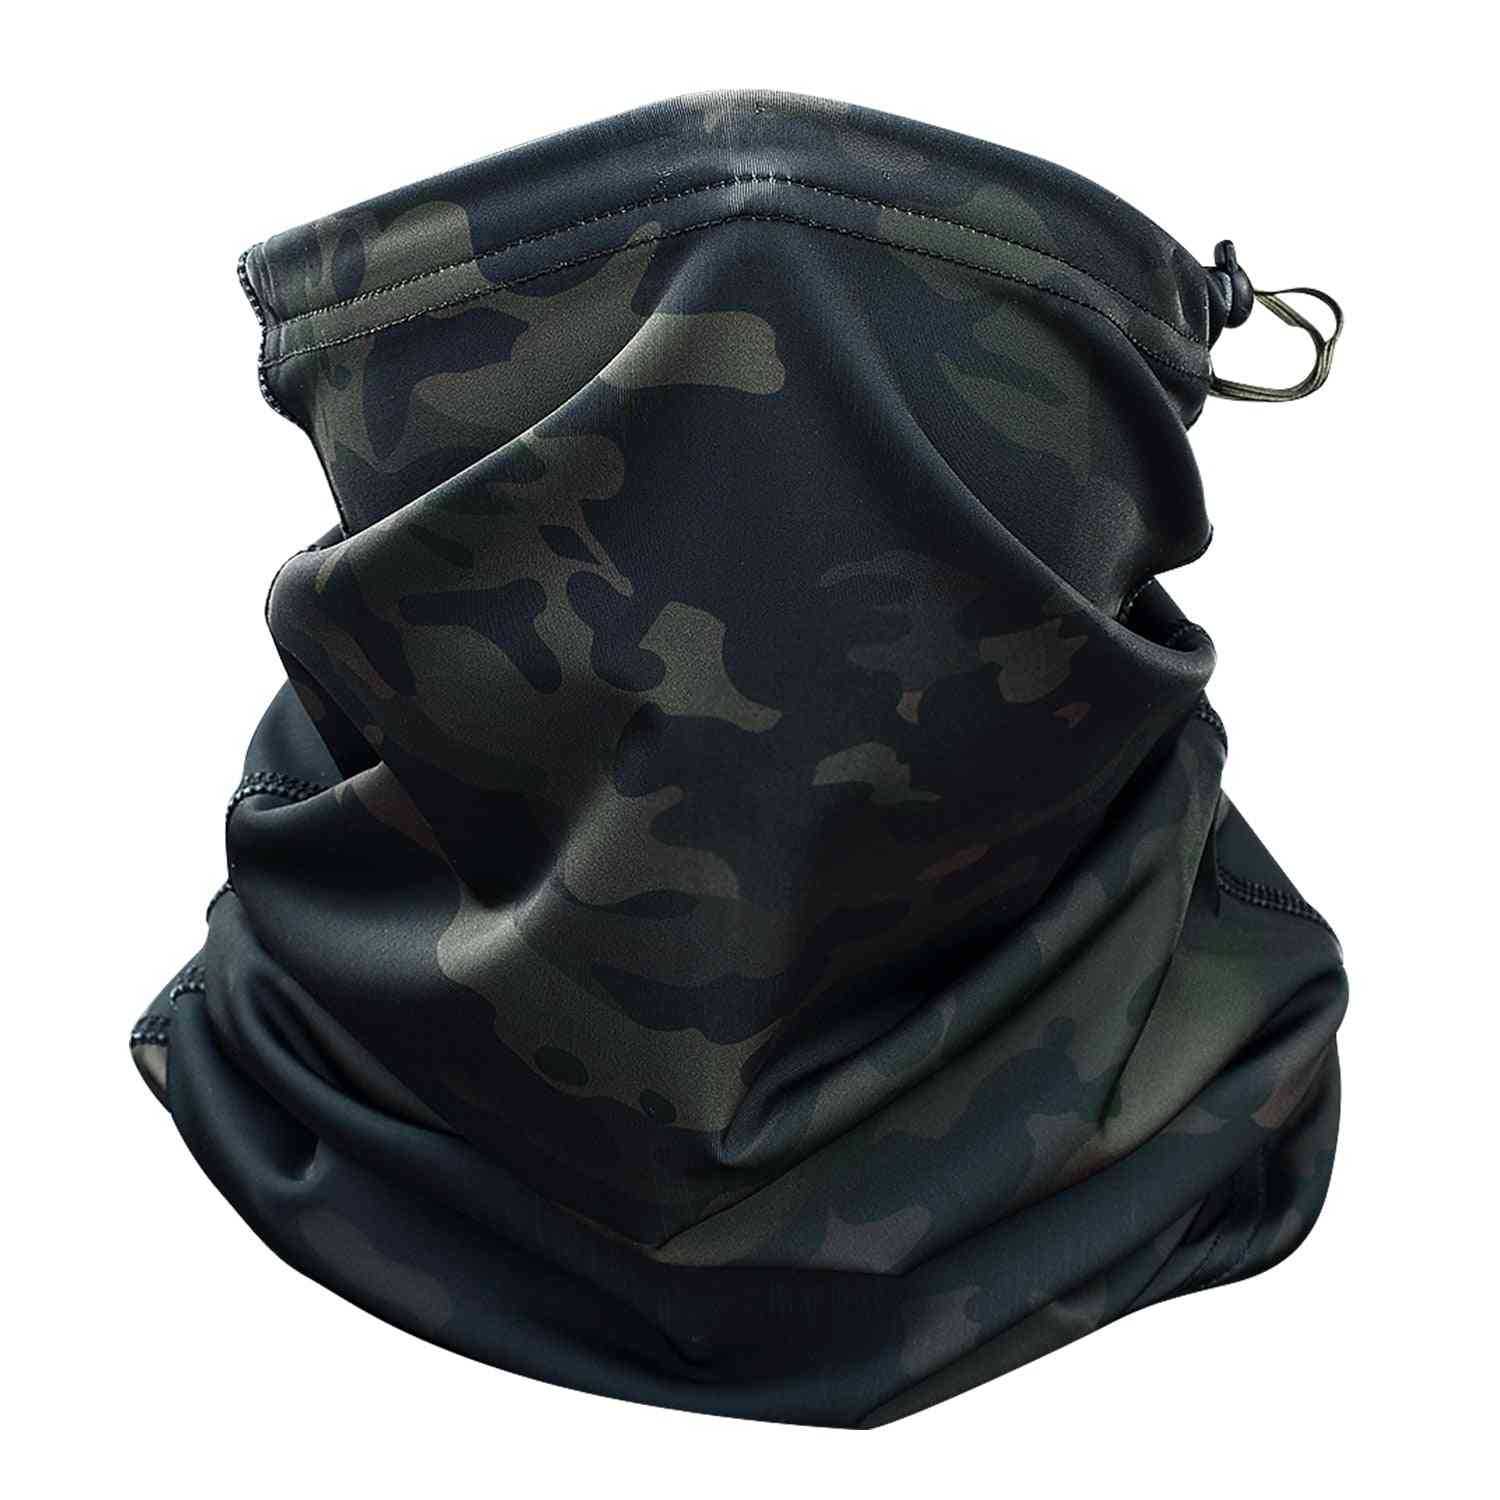 Magic Headband, Multicam Camouflage Tactical Neck Warmer For Military